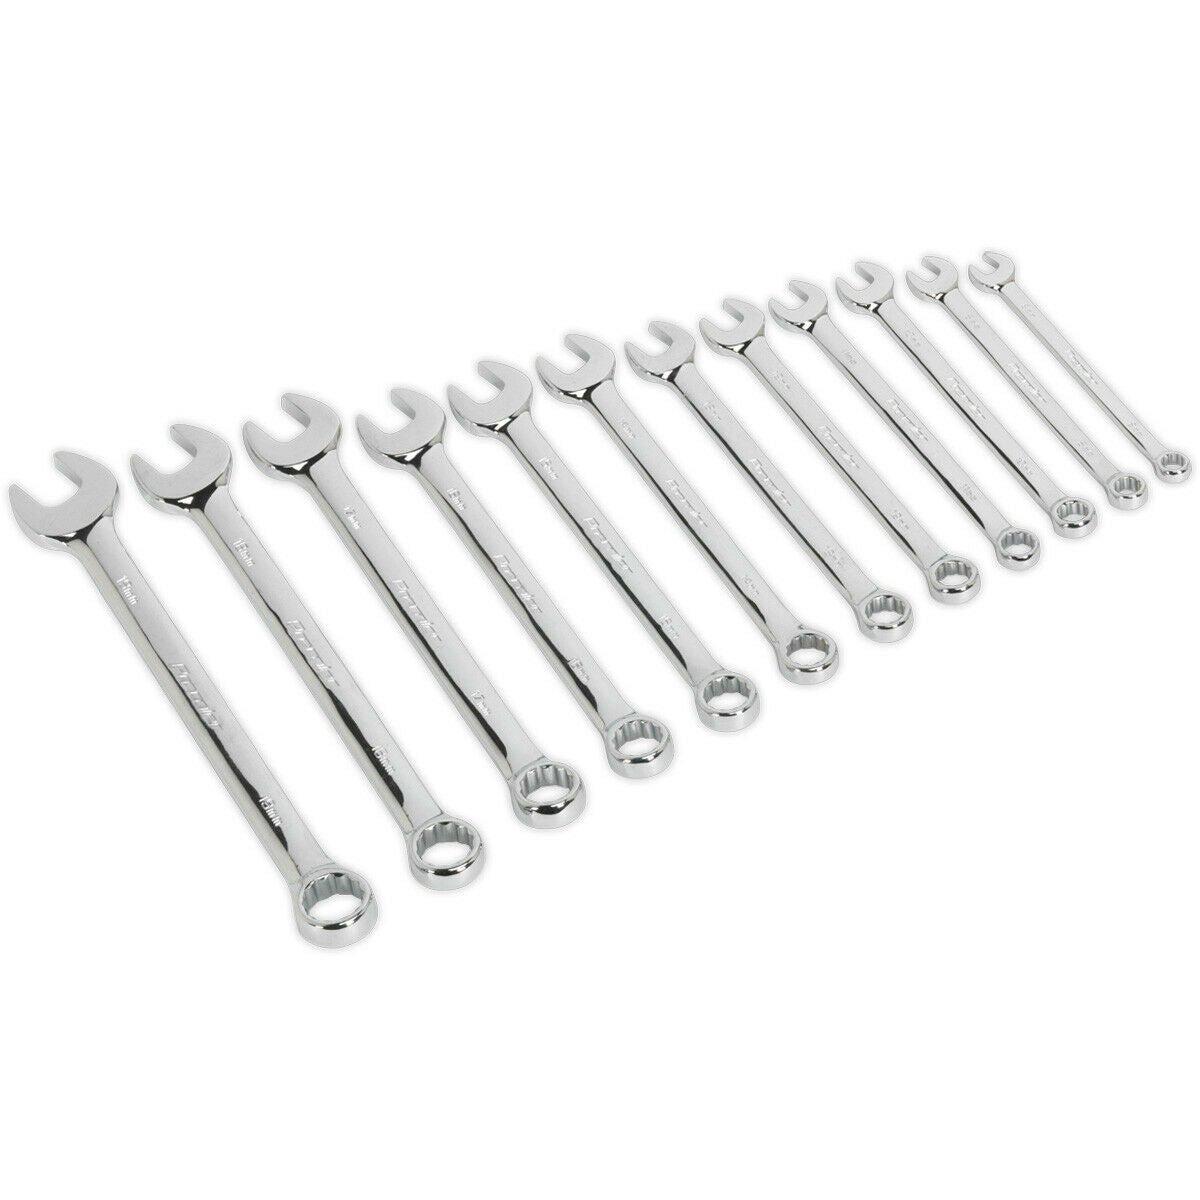 12pc Combination Hand Spanner Set - 8 to 19mm Metric 12 Point Socket Nut Wrench